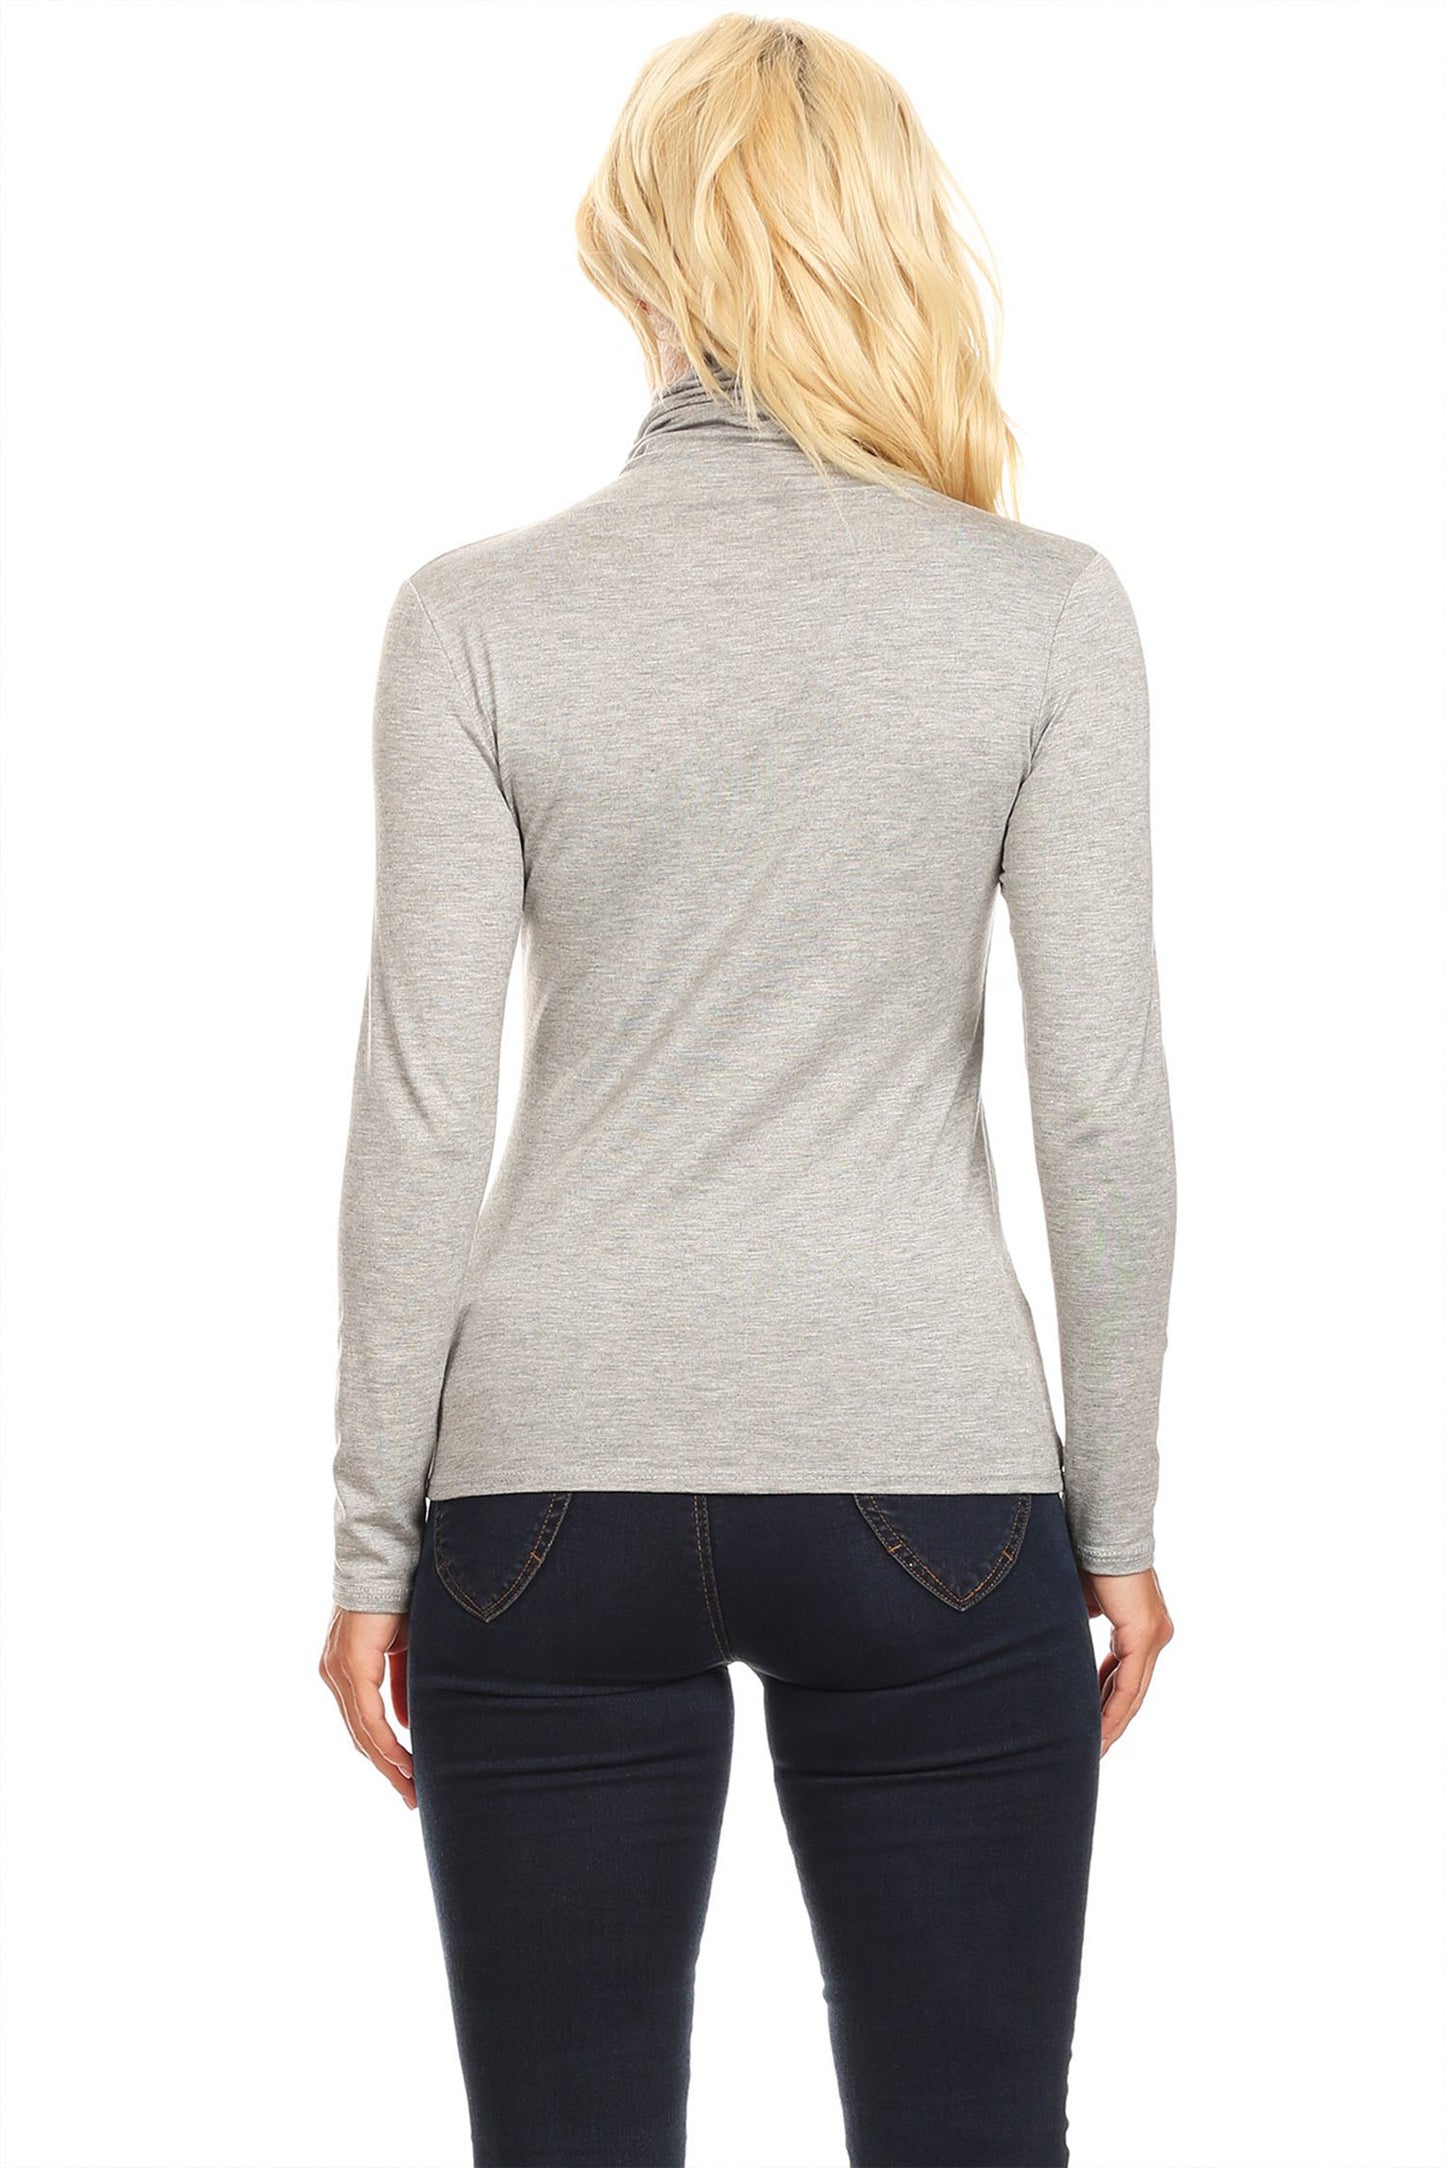 Women's Solid Basic Casual Long Sleeve Turtleneck Lightweight Pullover Top Sweater